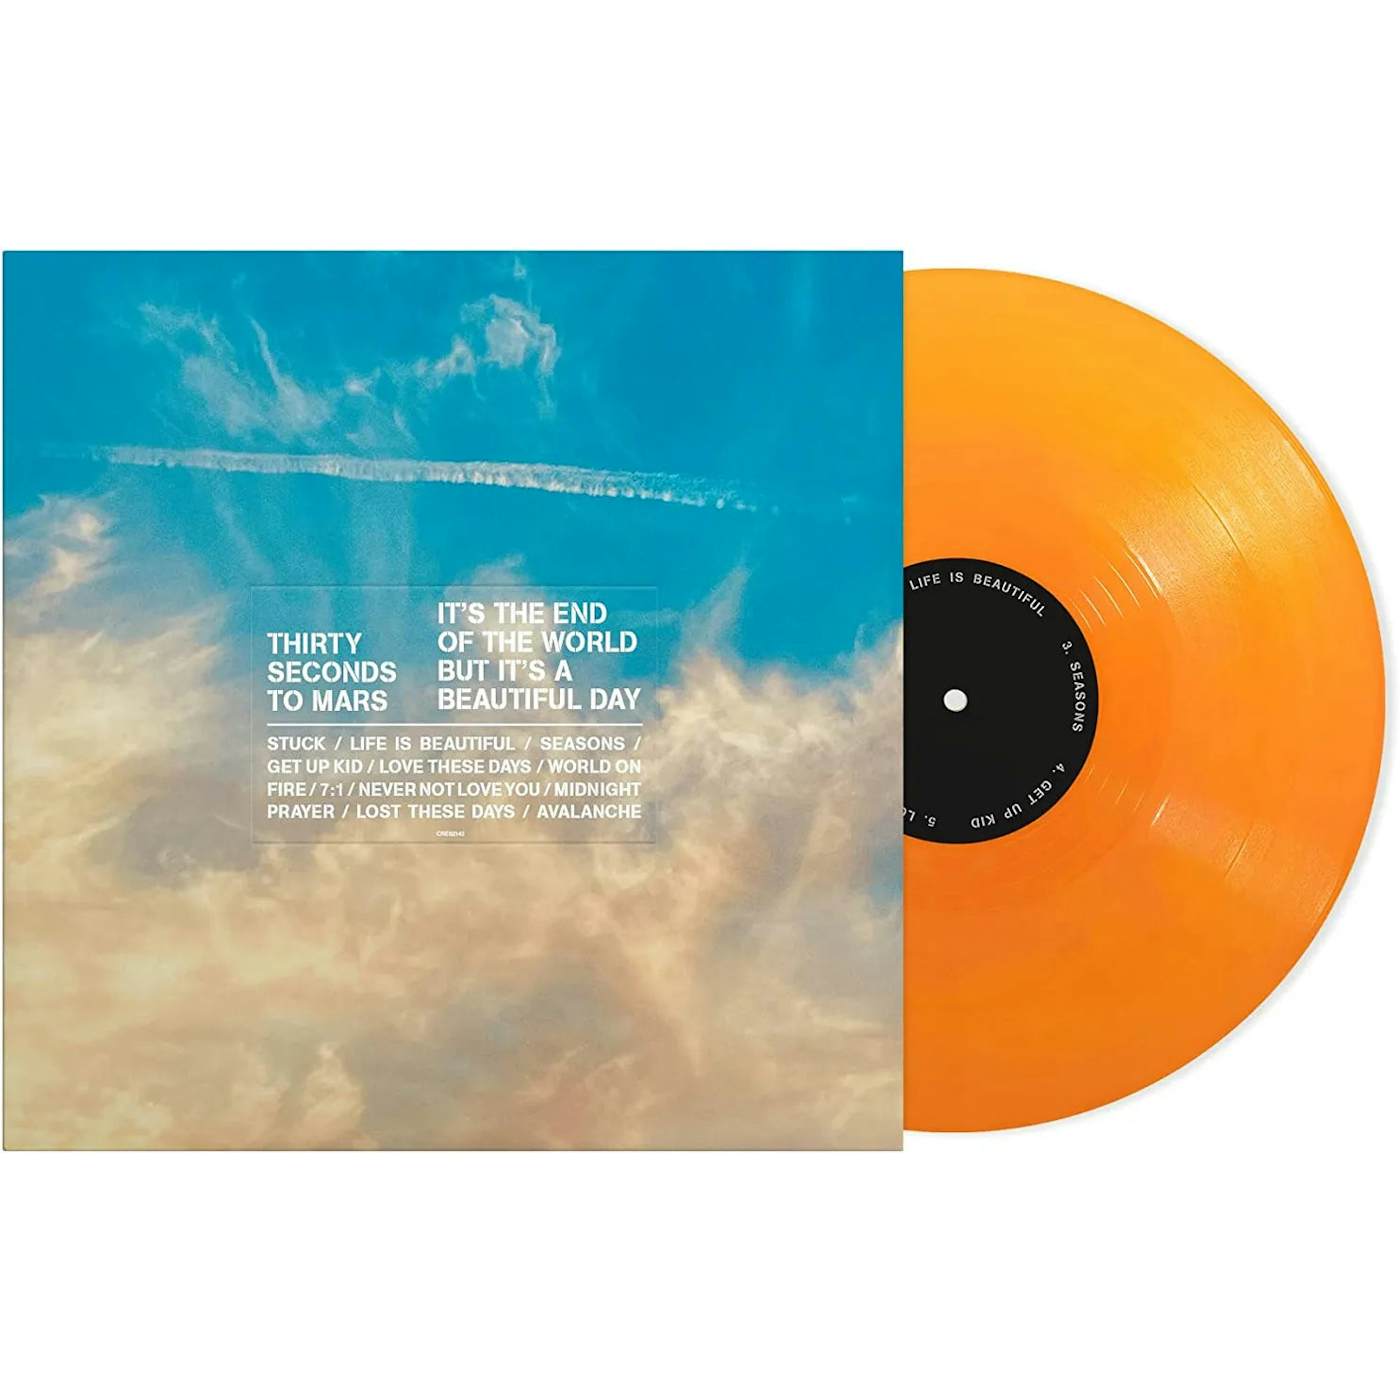 Thirty Seconds To Mars - It’s The End Of The World But It’s A Beautiful Day (Vinyl)